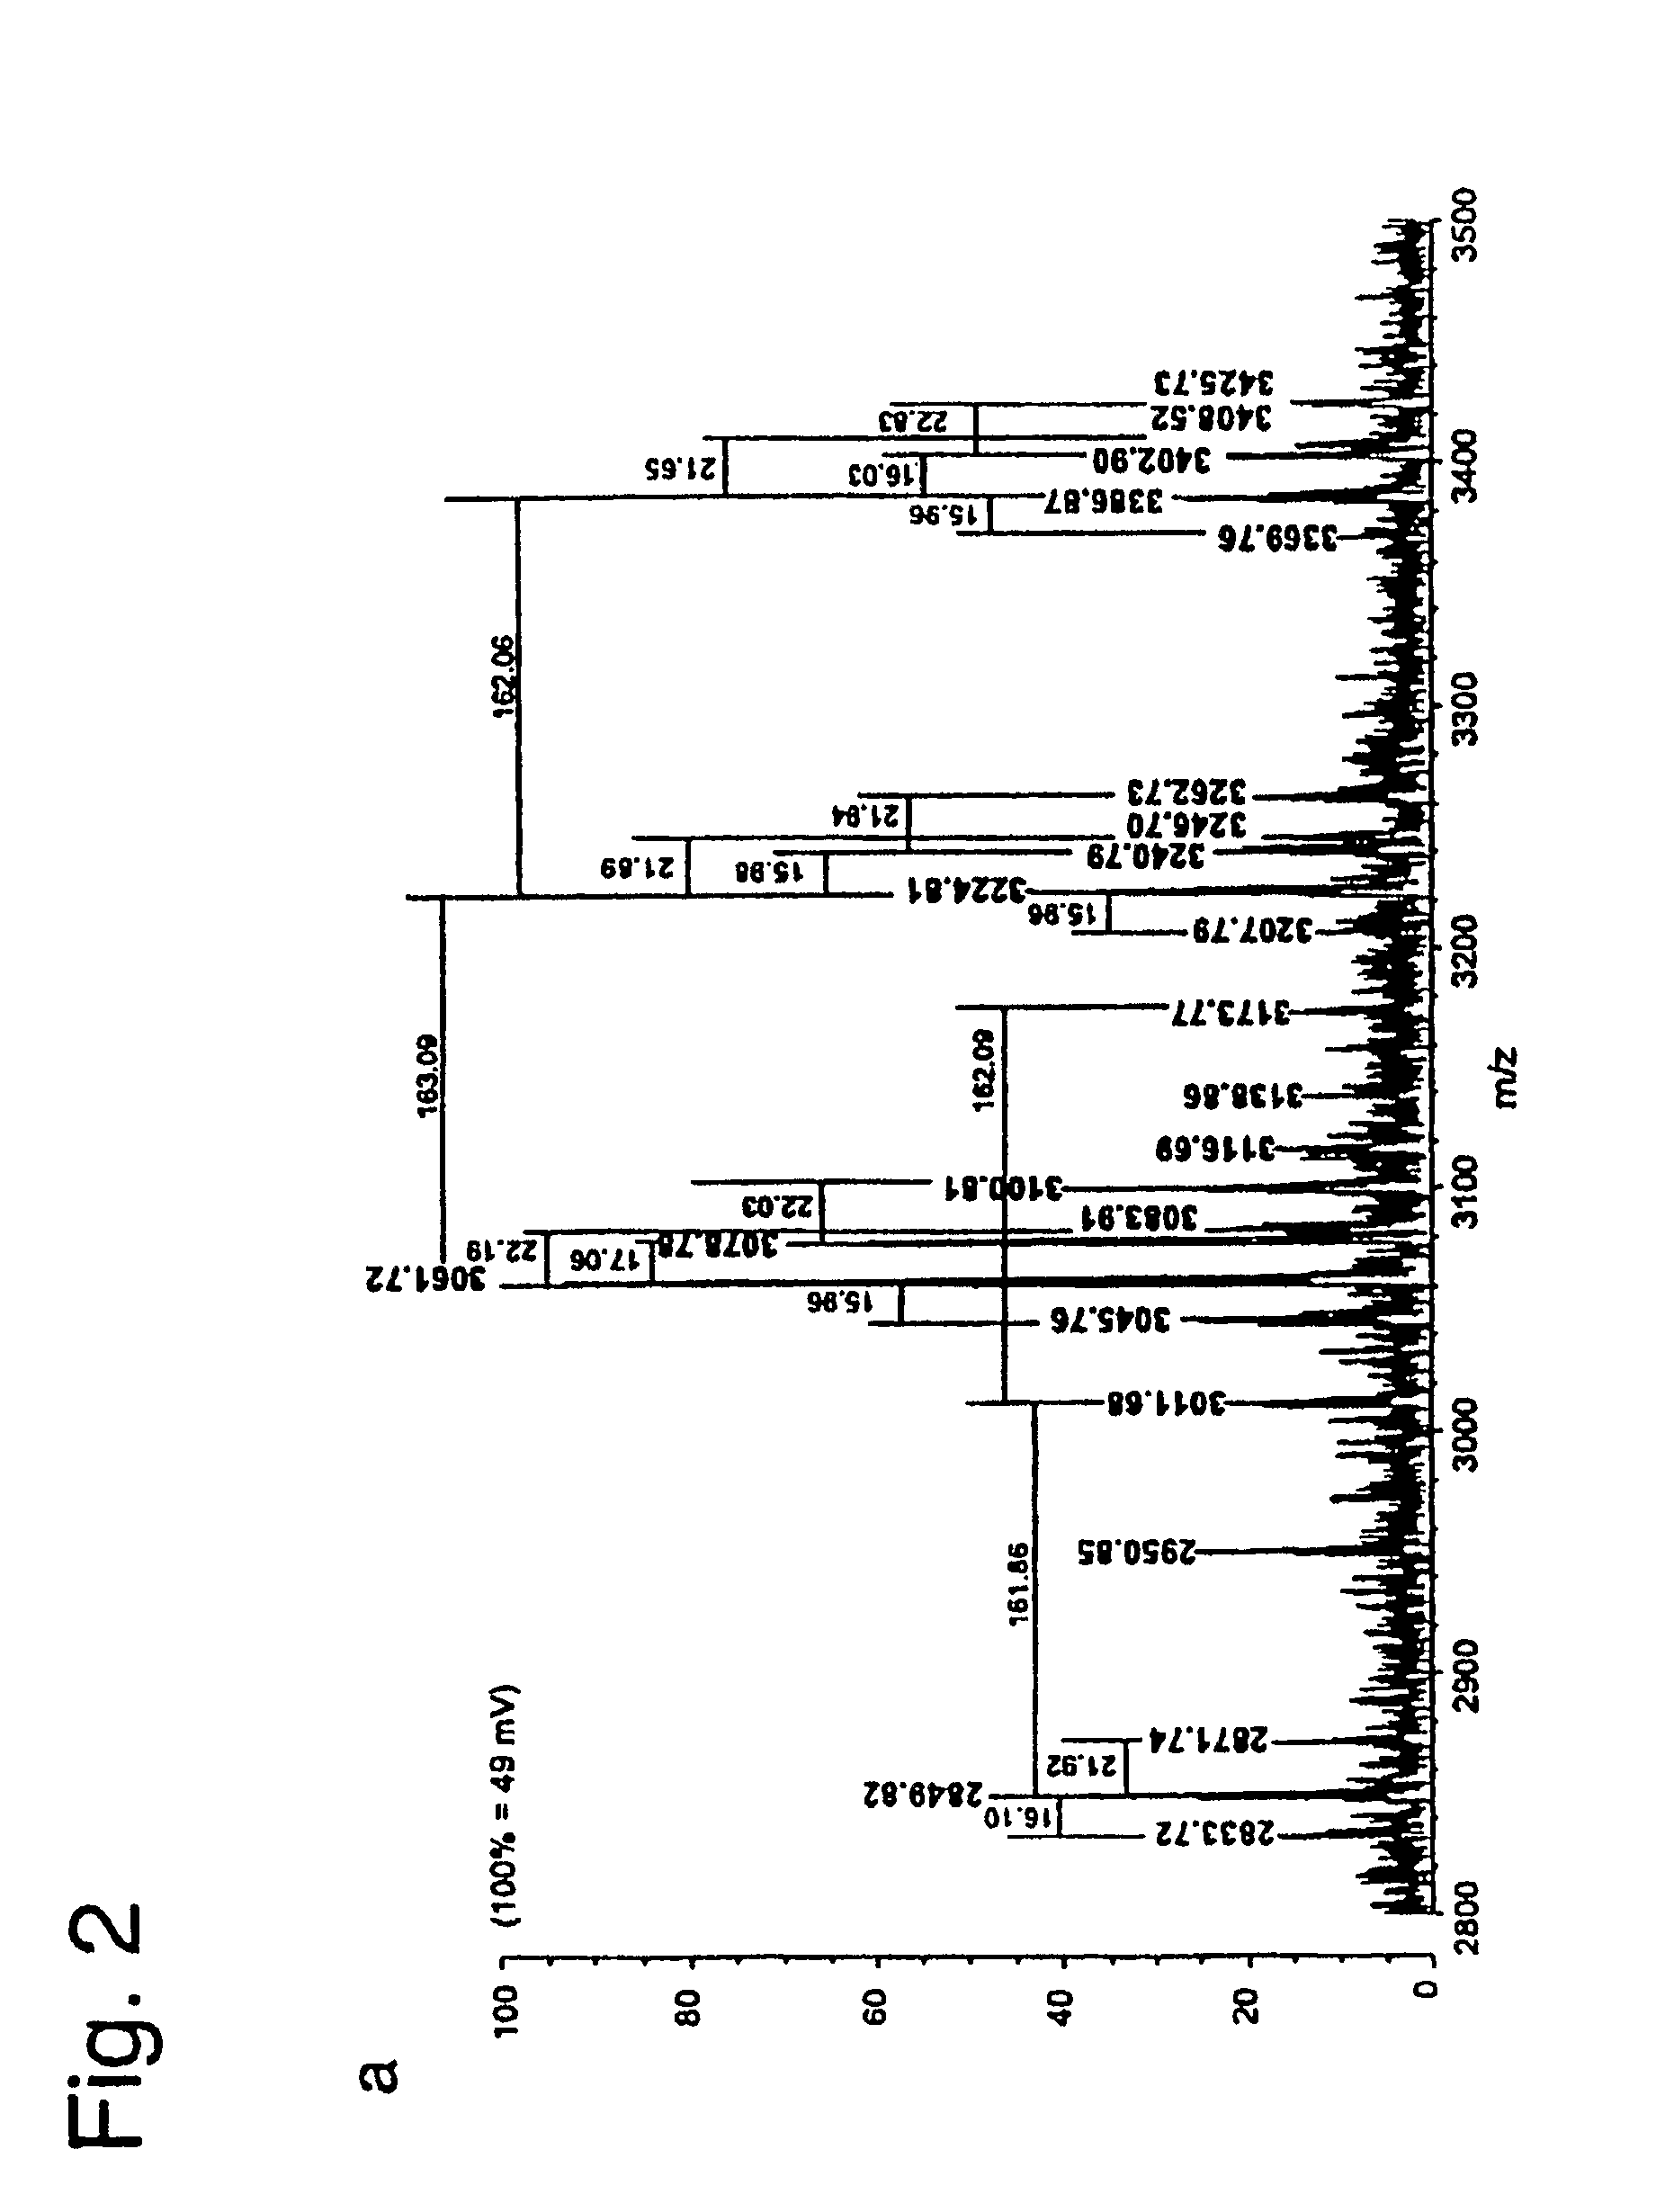 Method for identifying and validating dominant T helper cell epitopes using an HLA-DM-assisted class II binding assay